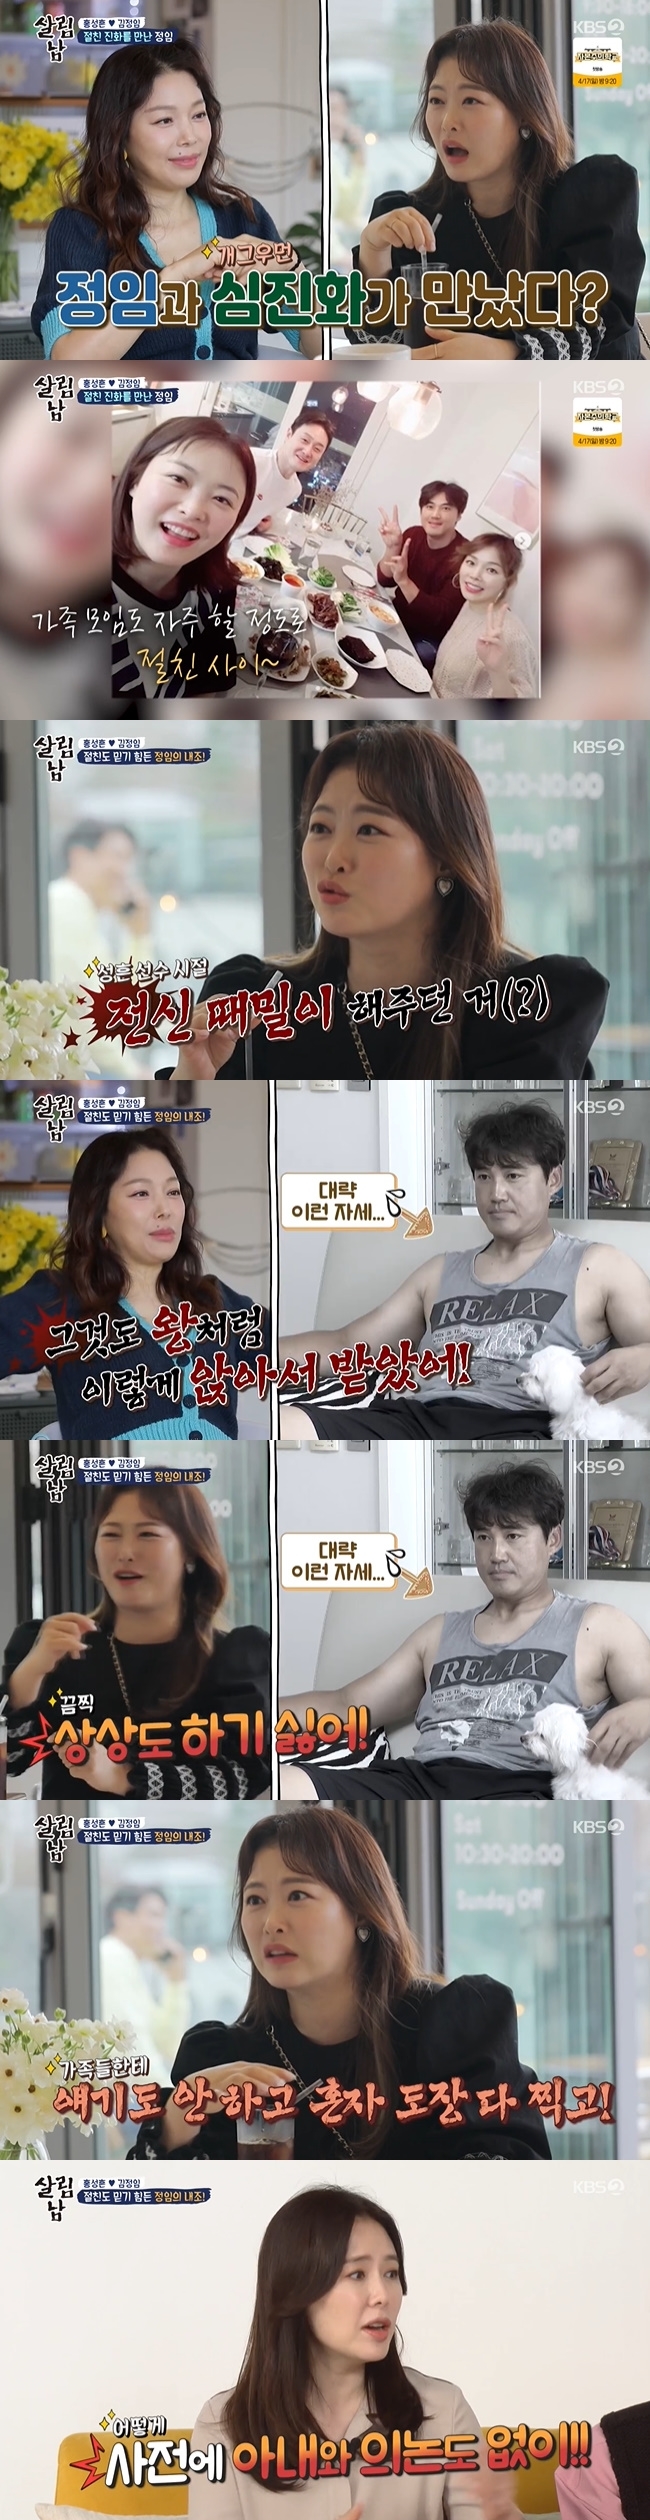 Shim Jin-hwa was amazed at the sacrifice of Kim Jung Im, who gave him the bath of Hong Sung-heonn in the past.On KBS 2TVs Season 2 of Living Men, which was broadcast on April 9, Hong Sung-heonns wife Kim Jung Im met with Shim Jin-hwa.Kim Jung Im and Shim Jin Hwa met at the cafe and talked.Kim Jung Im, who told the story of the fight with Hong Sung-heonn earlier, said, I do not think I have done wrong now.I still get creepy, said Shim Jin-hwa, and when I first met her, I thought she was lying, and every time I bathed my brother-in-law, I was a full-body smear.I was so big on my thighs, but how did I push the time? Kim Jung Im reenacted the pose of Hong Sung-heonn at the time, saying, I was sitting like a king. Sim Jin-hwa shuddered, I do not want to imagine.It was a shock to go to United States of America, Shim Jin-hwa said.I do not talk and take all the stamps alone. He pointed out the behavior of Hong Sung-heon when he was a United States of America coach.Haheera, who watched the video, said, This can not be over, should I discuss it with my wife before making such an important decision? Choi Soo-jong was surprised that he was crazy.